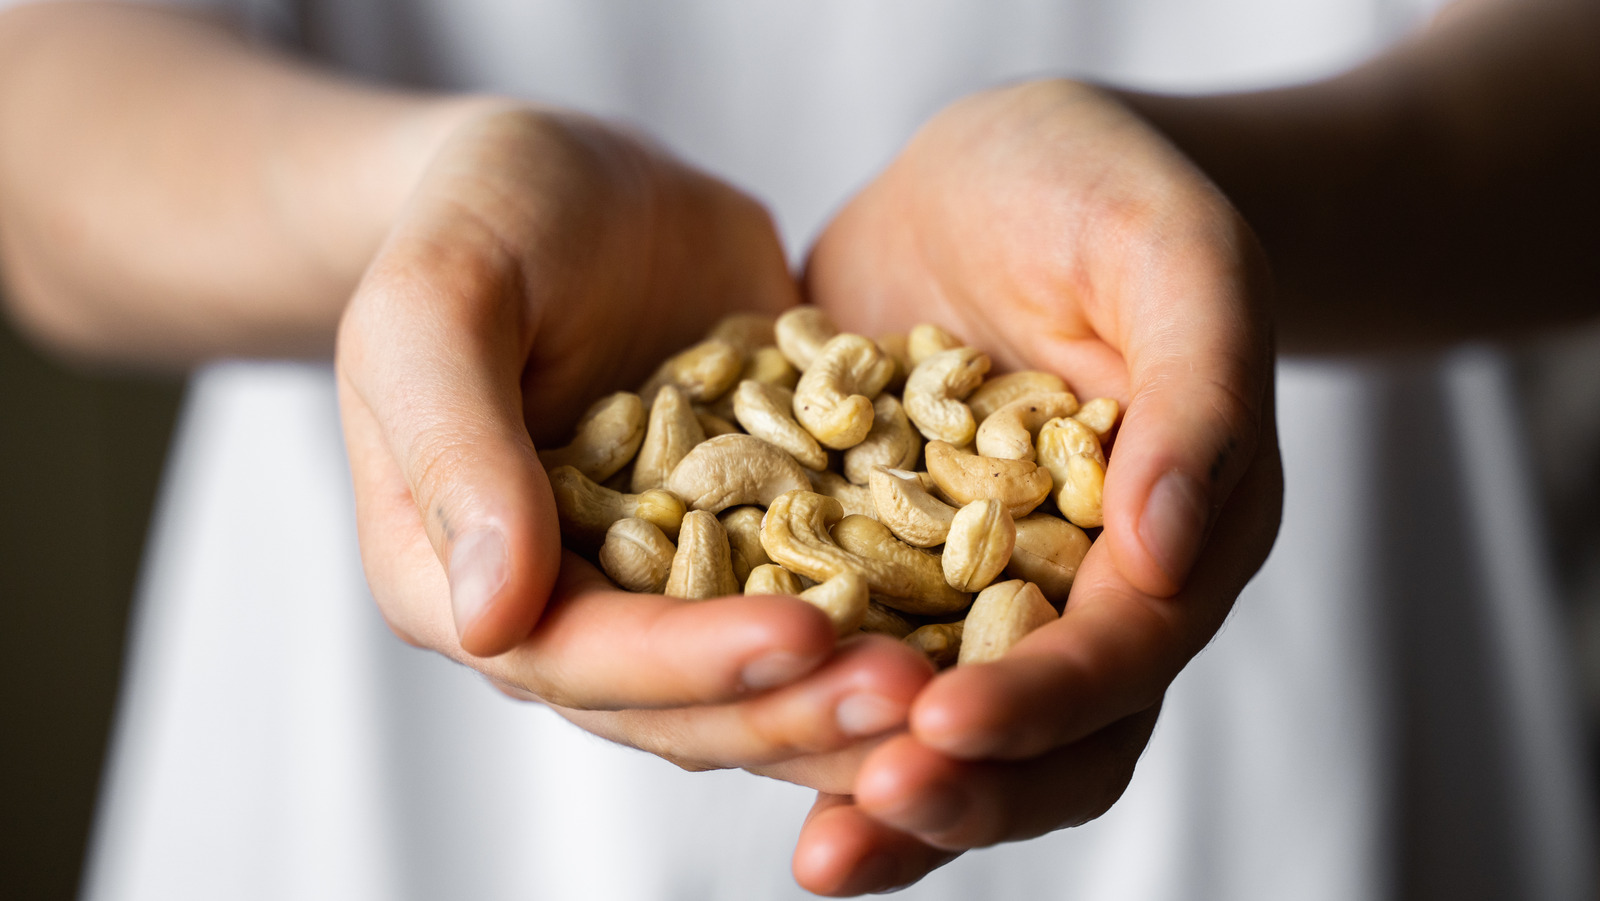 Can Eating Cashews Reduce Your Risk Of Cancer? Here’s What We Know – Health Digest